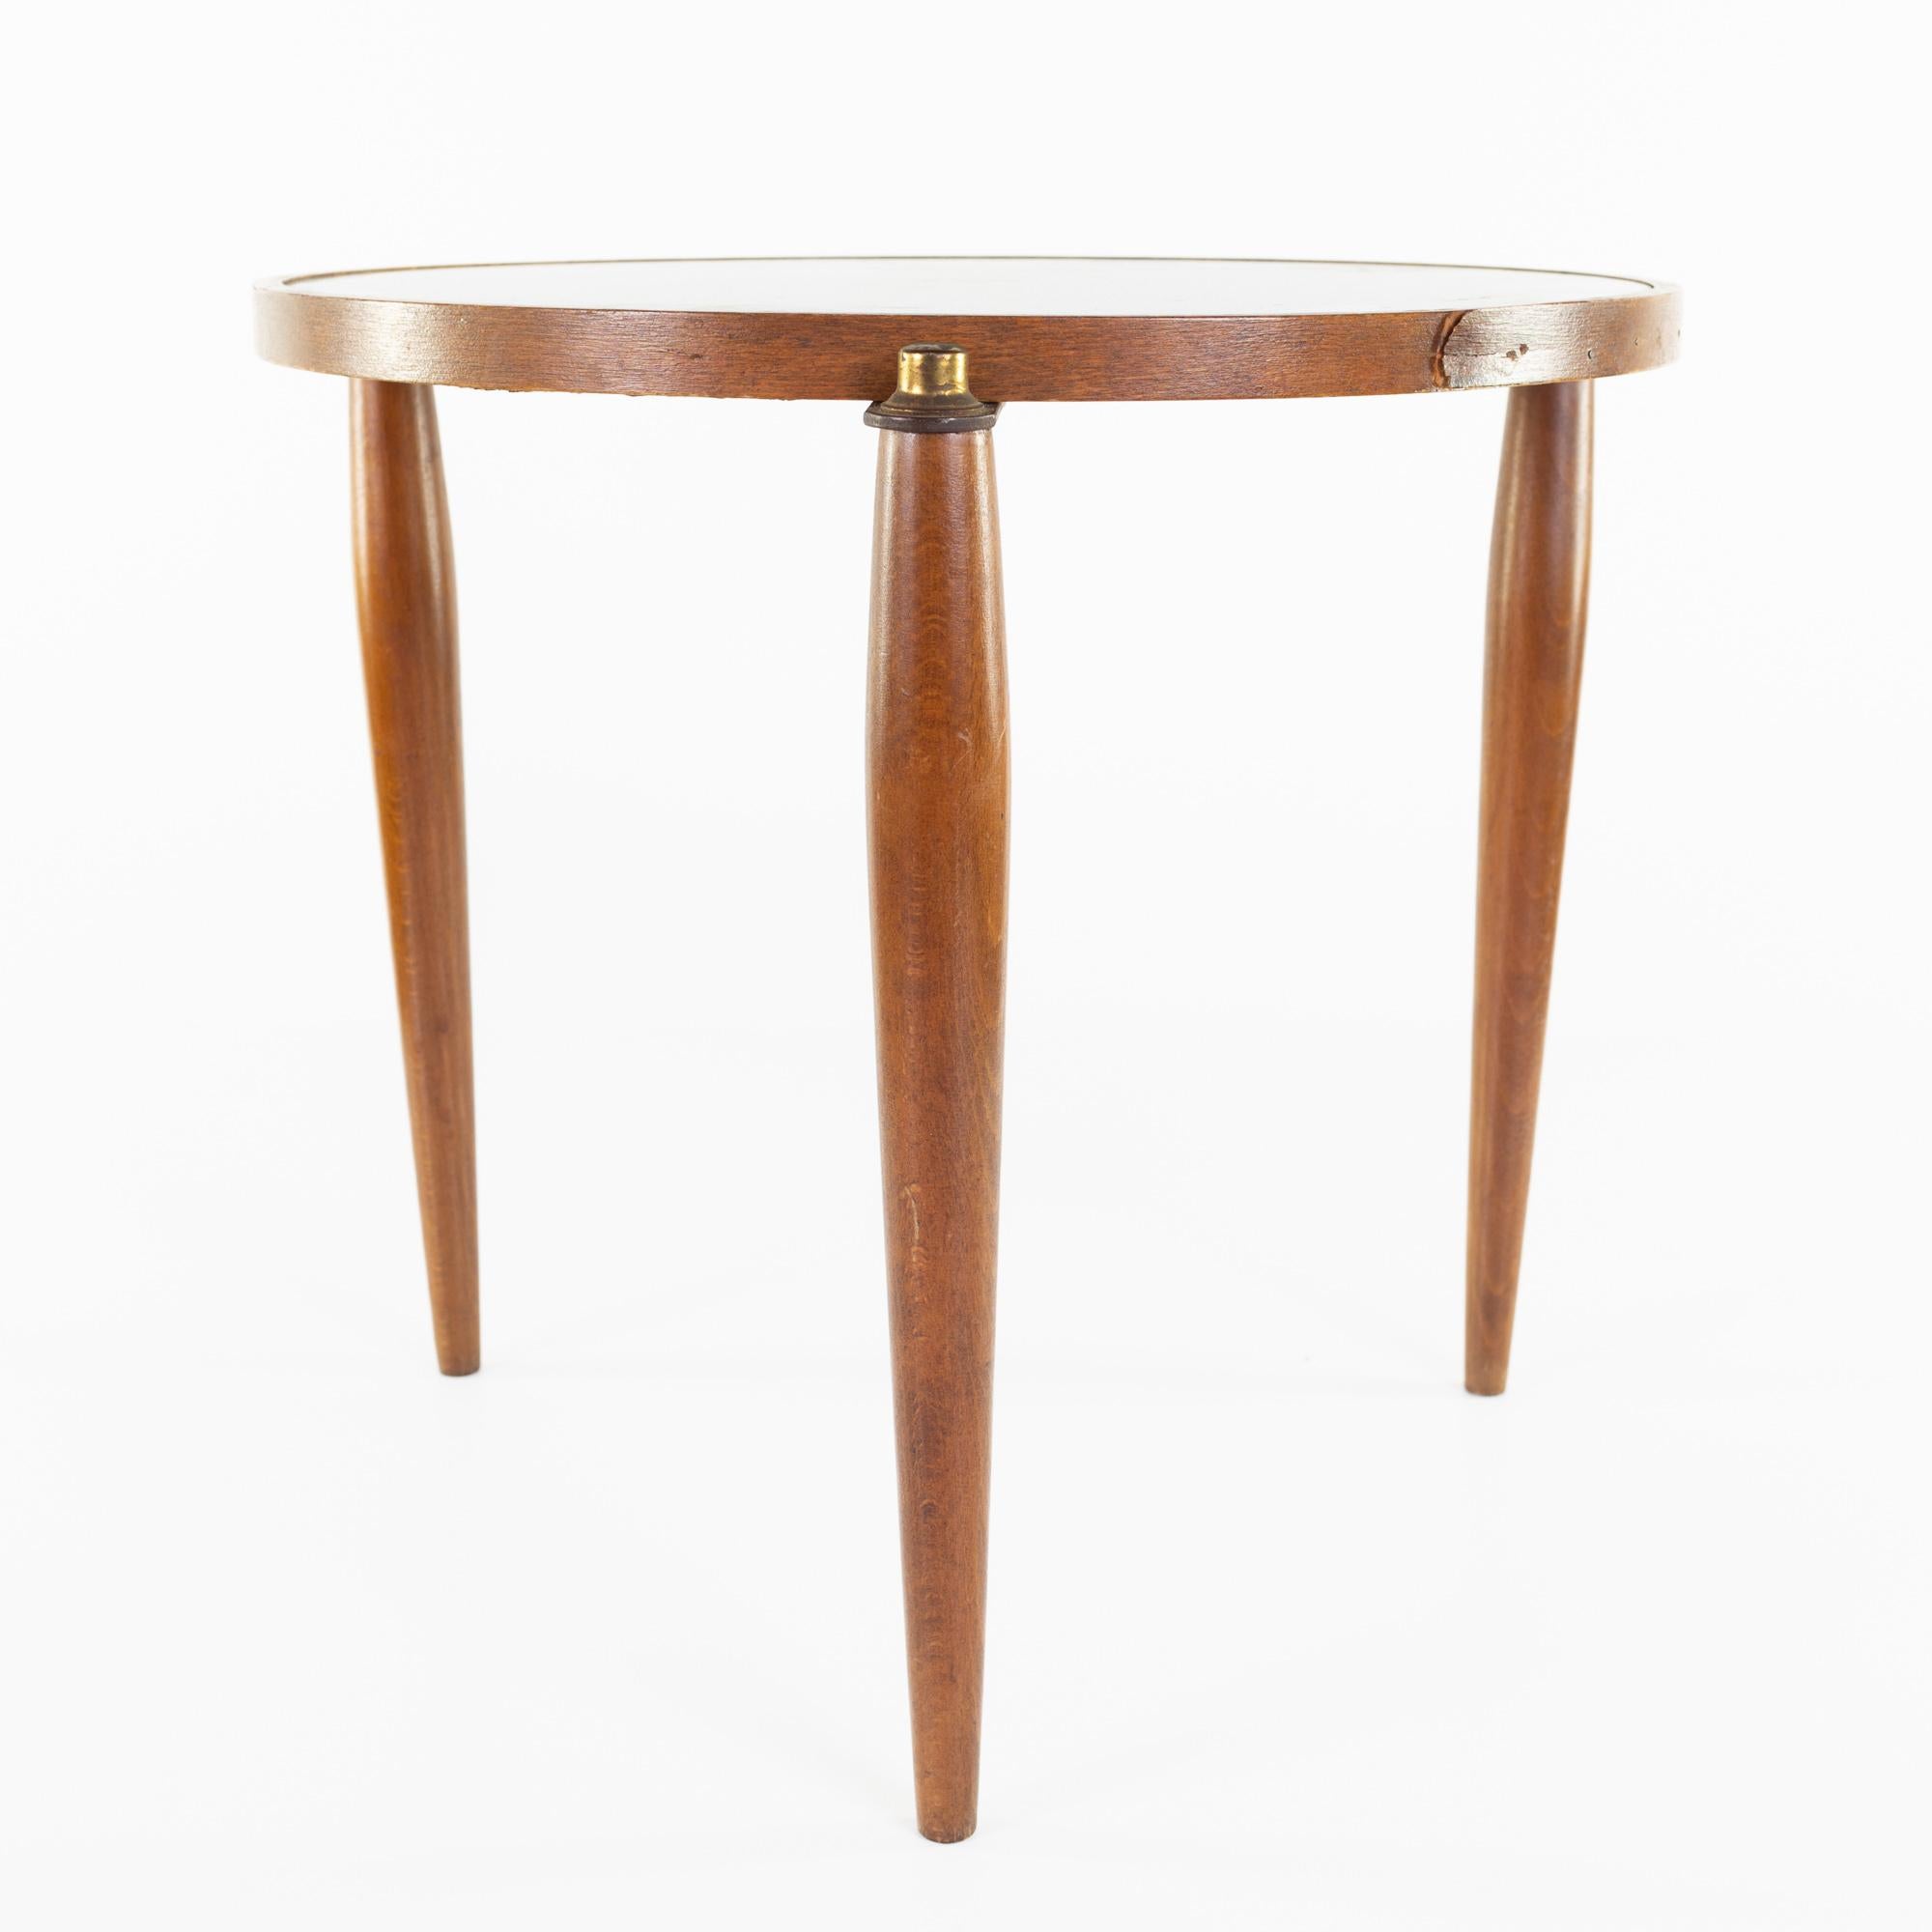 Mid century amber glass walnut and brass end table

This table measures: 17.5 wide x 17.5 deep x 15.5 inches high

All pieces of furniture can be had in what we call restored vintage condition. That means the piece is restored upon purchase so